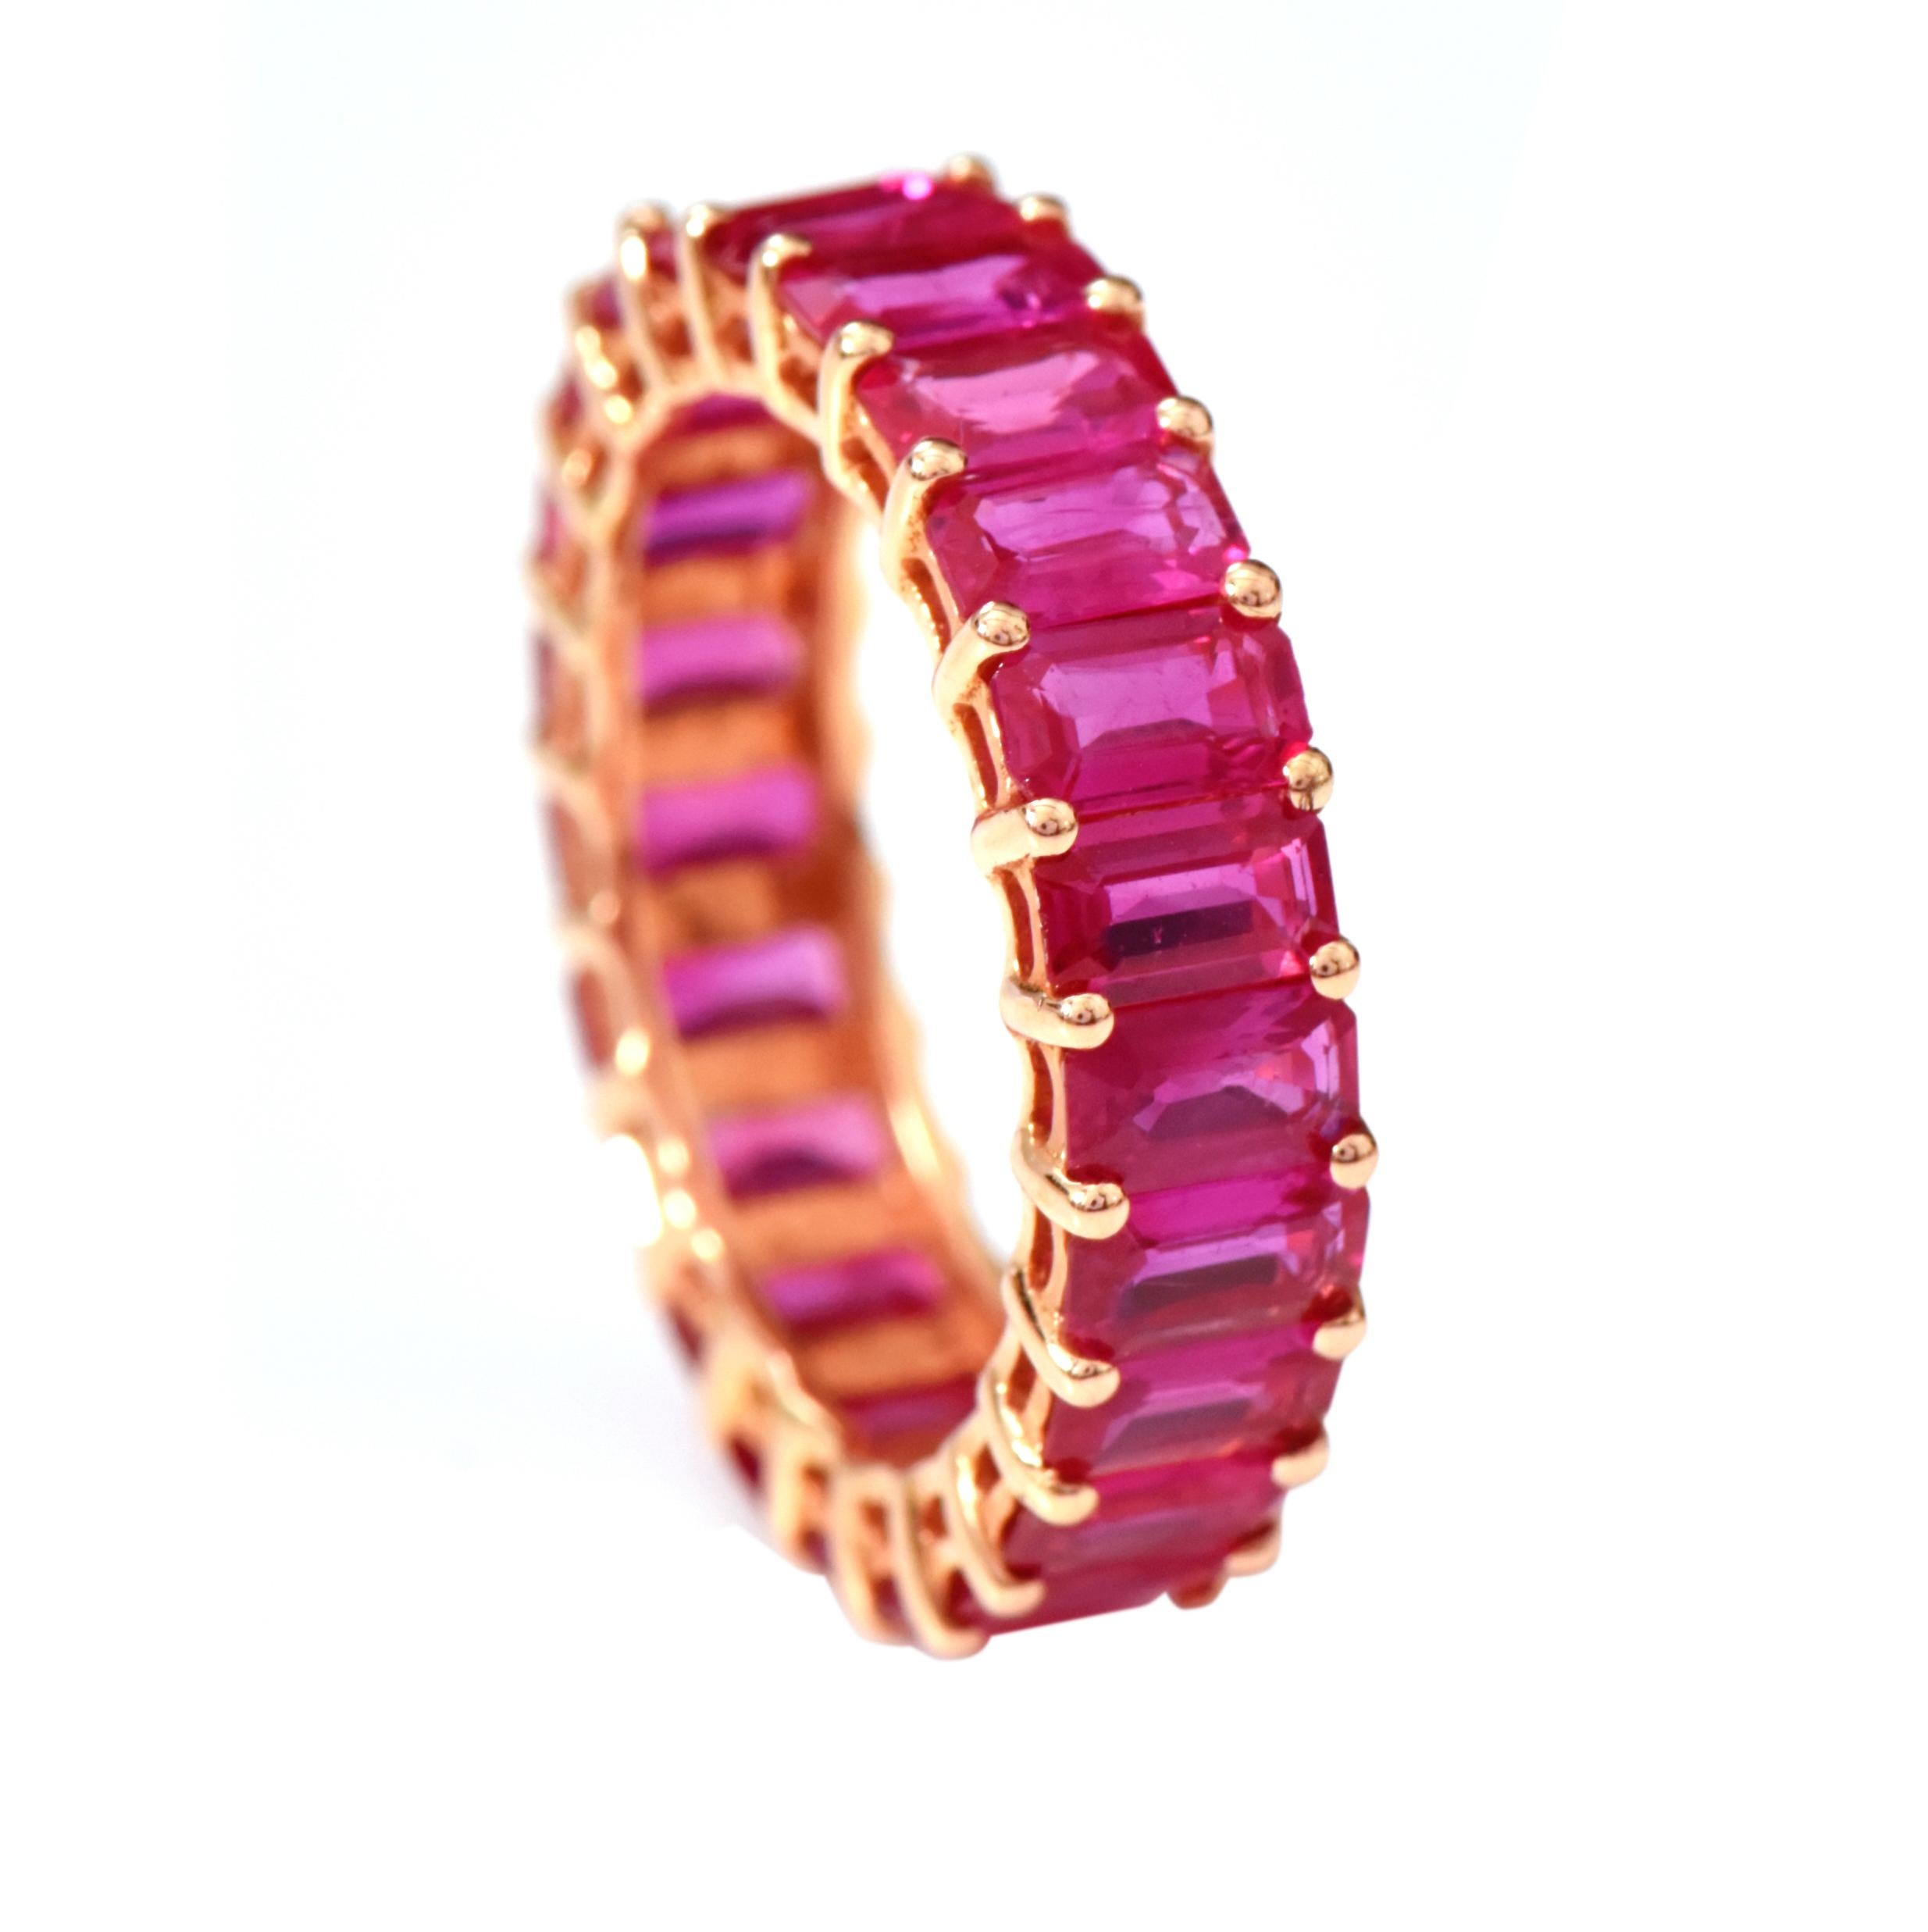 18 Karat Rose Gold 5.63 Carat Ruby Emerald-Cut Full Band Ring 

This exquisite crimson red emerald-cut ruby full band is tasteful. The identically matched and sized 22-emerald cut rubies are strongly held by the common prongs in the grain setting.